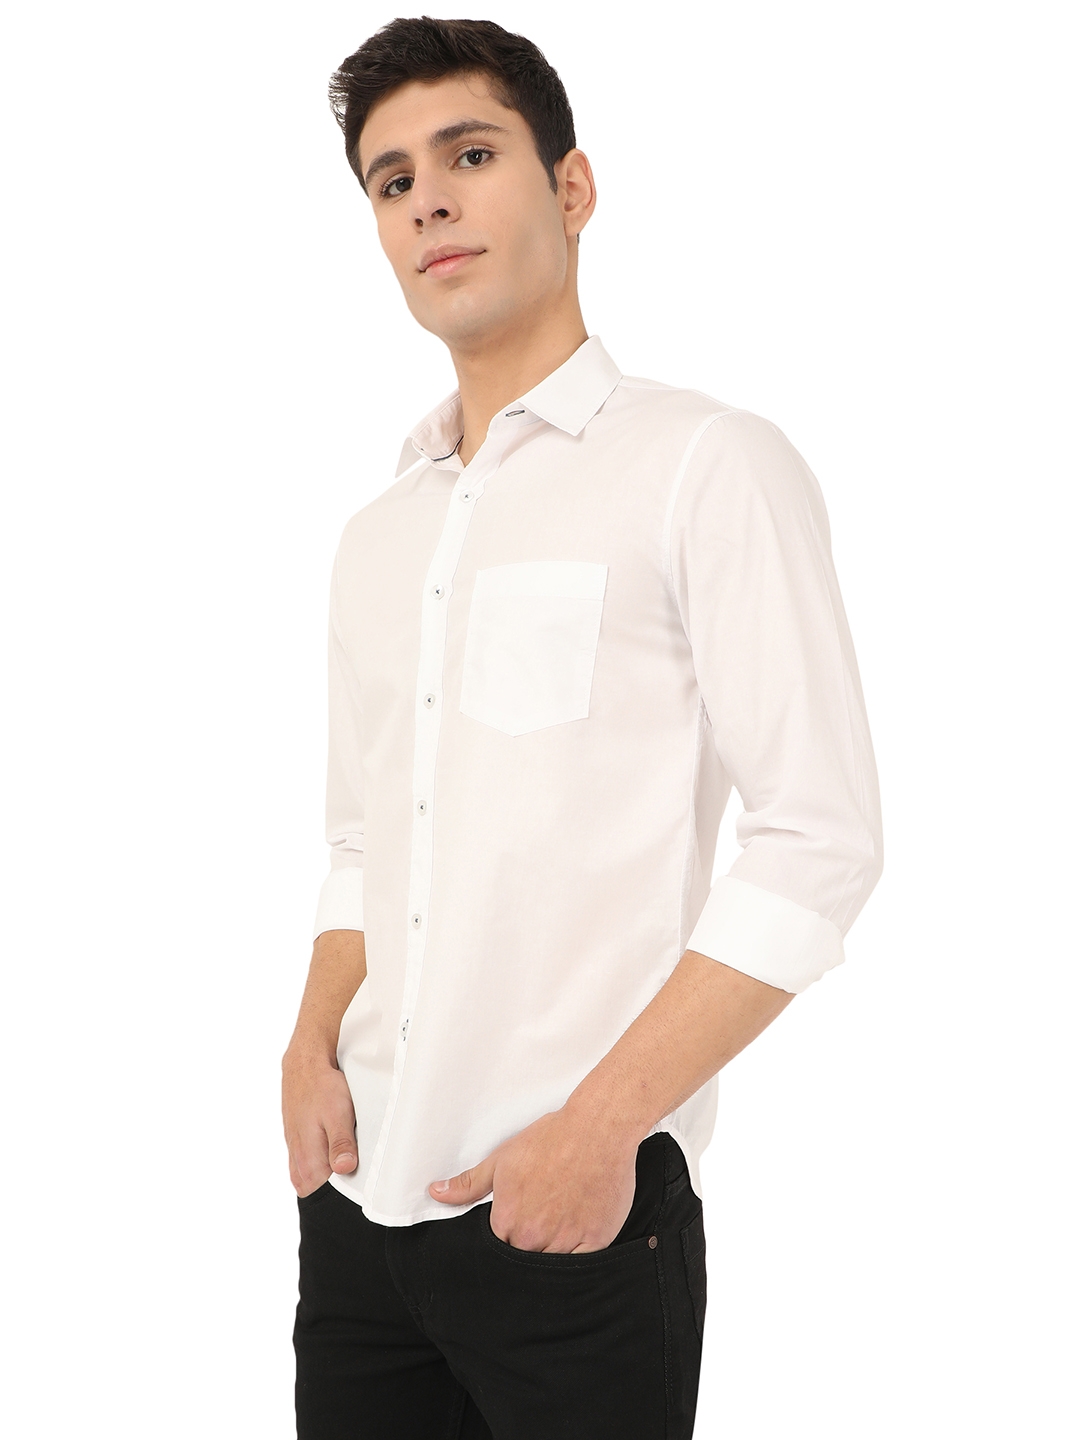 Greenfibre | Bright White Solid Slim Fit Semi Casual Shirt | Greenfibre 1